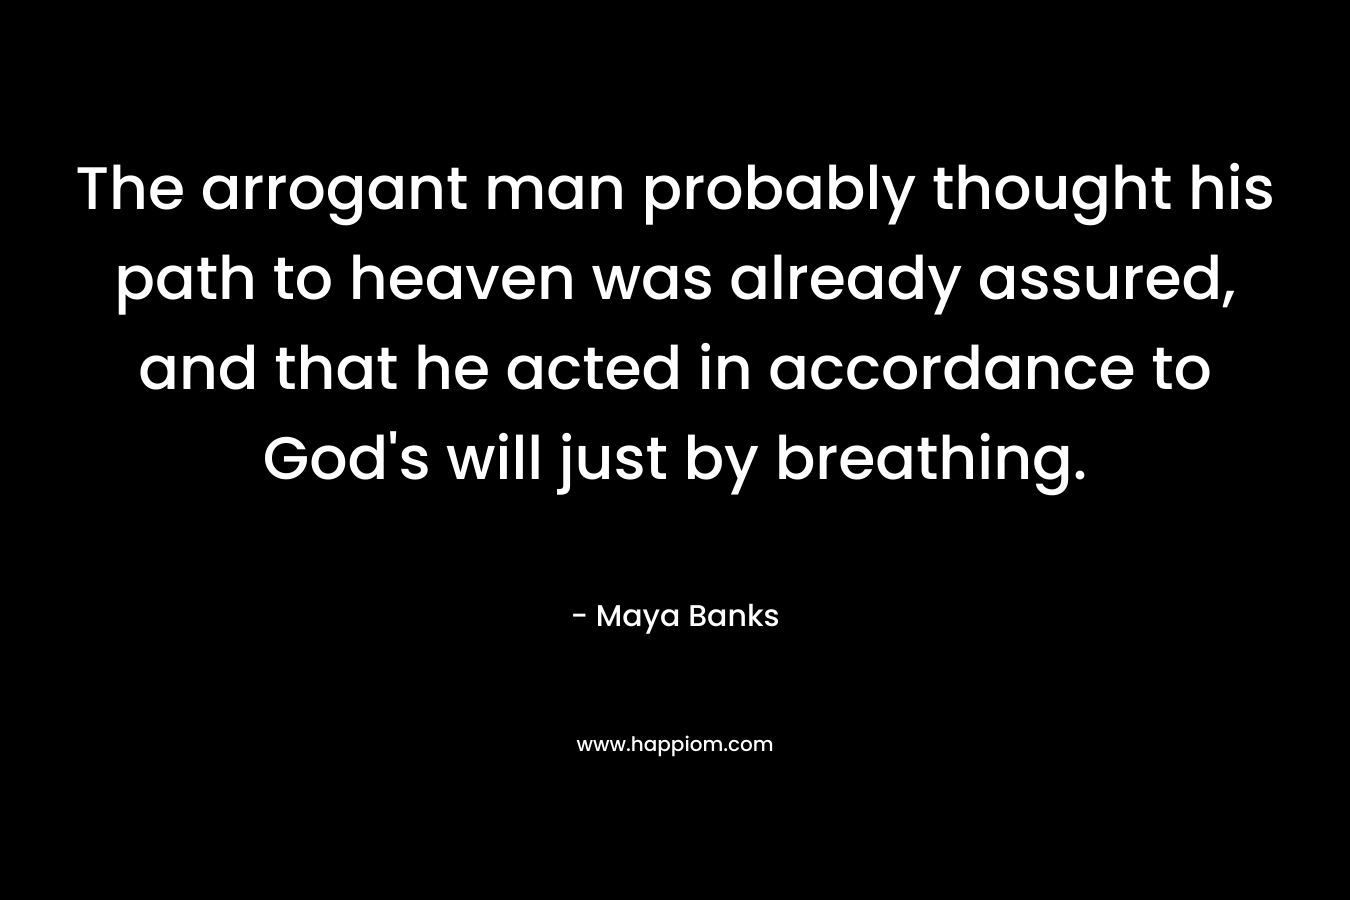 The arrogant man probably thought his path to heaven was already assured, and that he acted in accordance to God's will just by breathing.